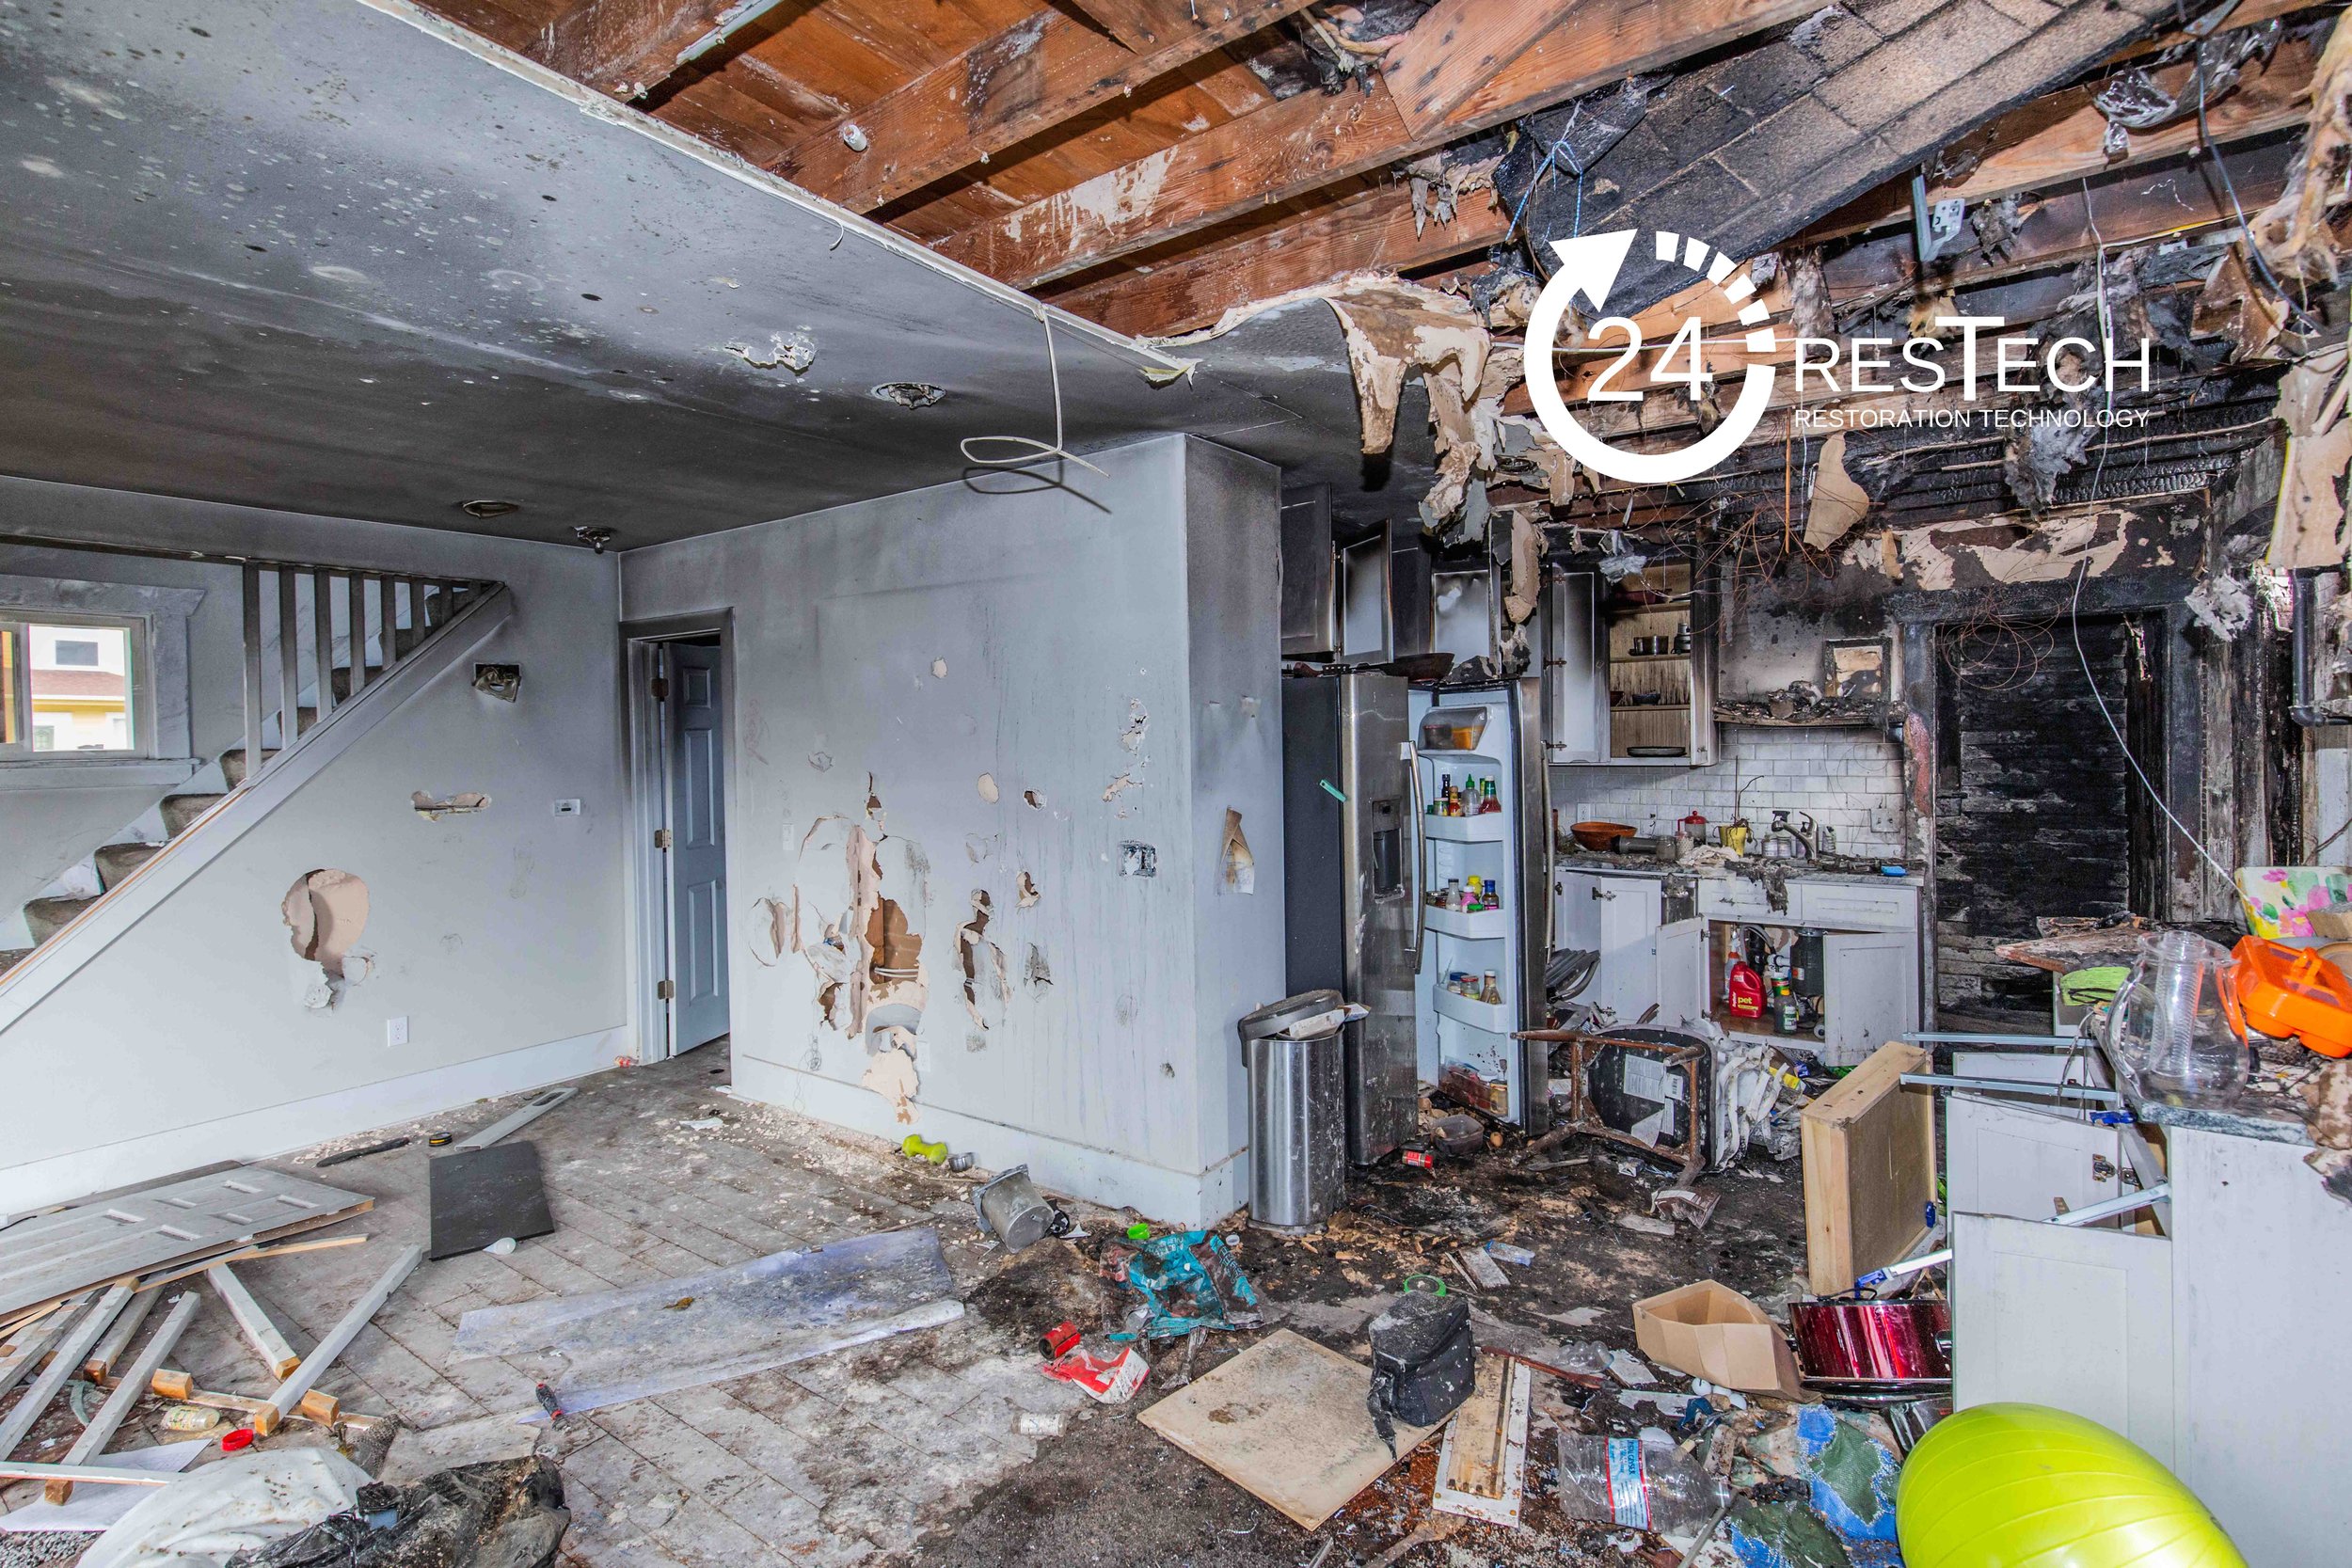 24ResTech's Fire Damage Restoration Project - Living Room and Kitchen Restoration, Smoke Clean-Up and Removal, Abatement